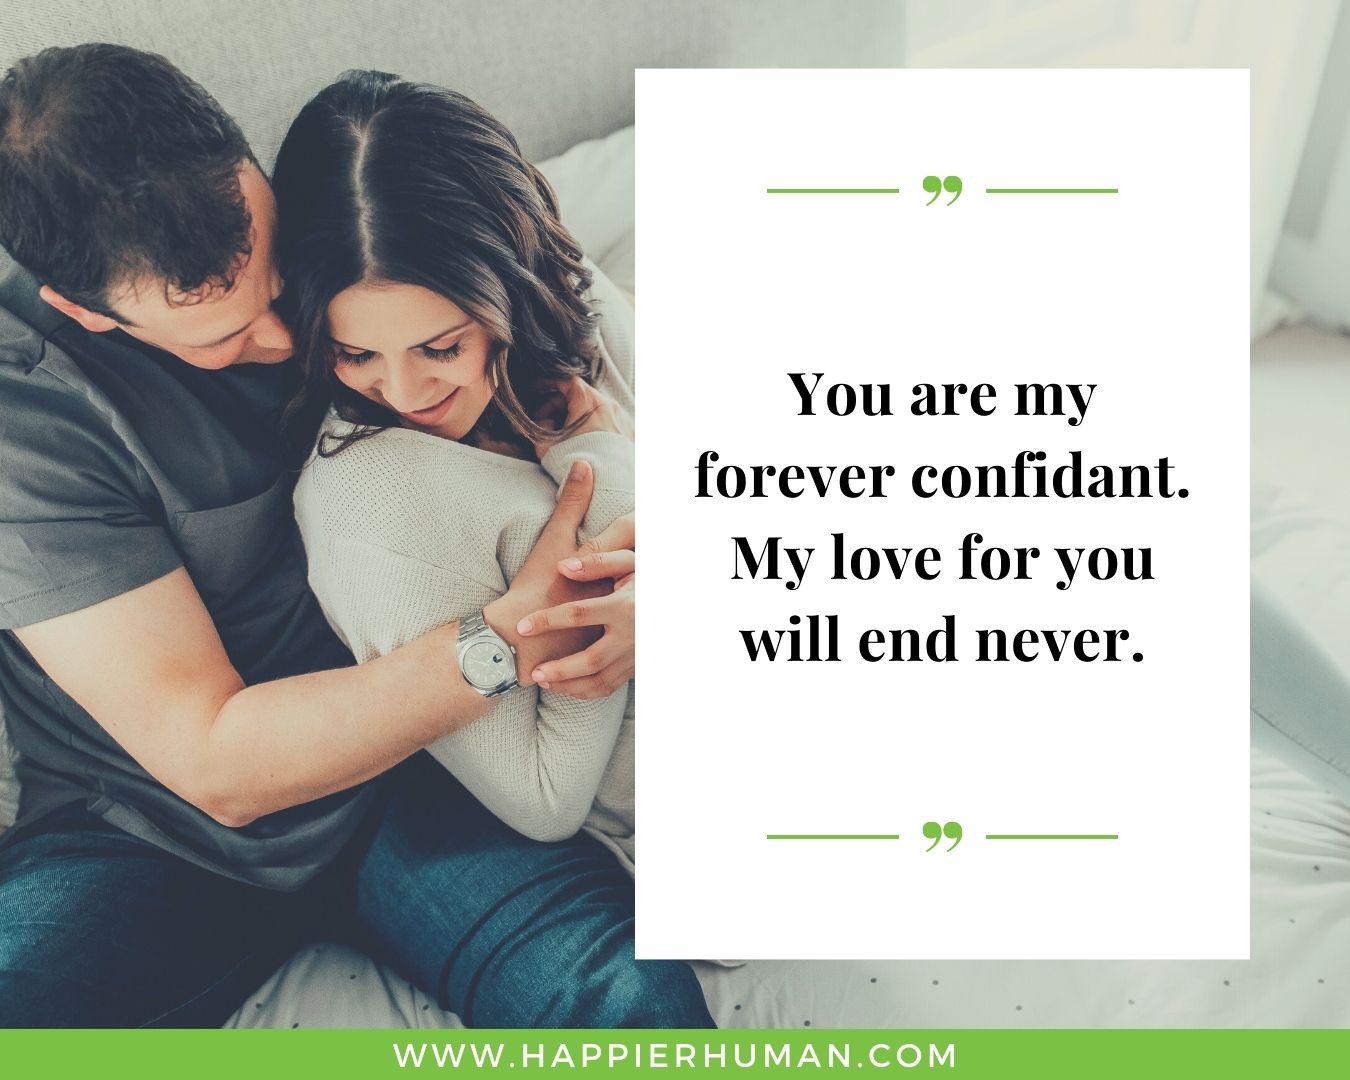 Unconditional Love Quotes for Her - “You are my forever confidant. My love for you will end never.”